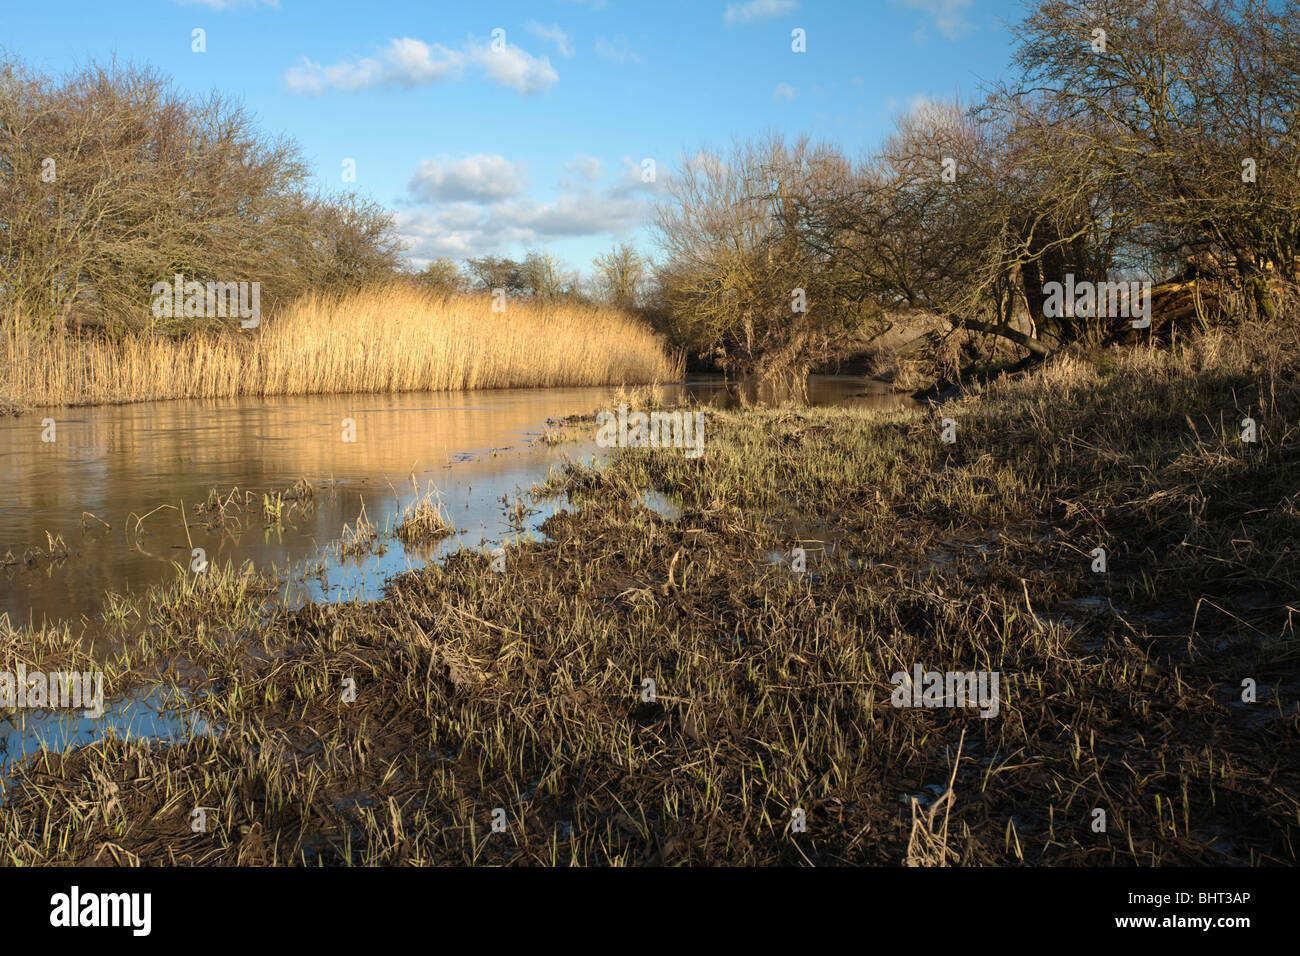 Upper Reaches Of The River Thames Near Cricklade Wiltshire Uk Stock